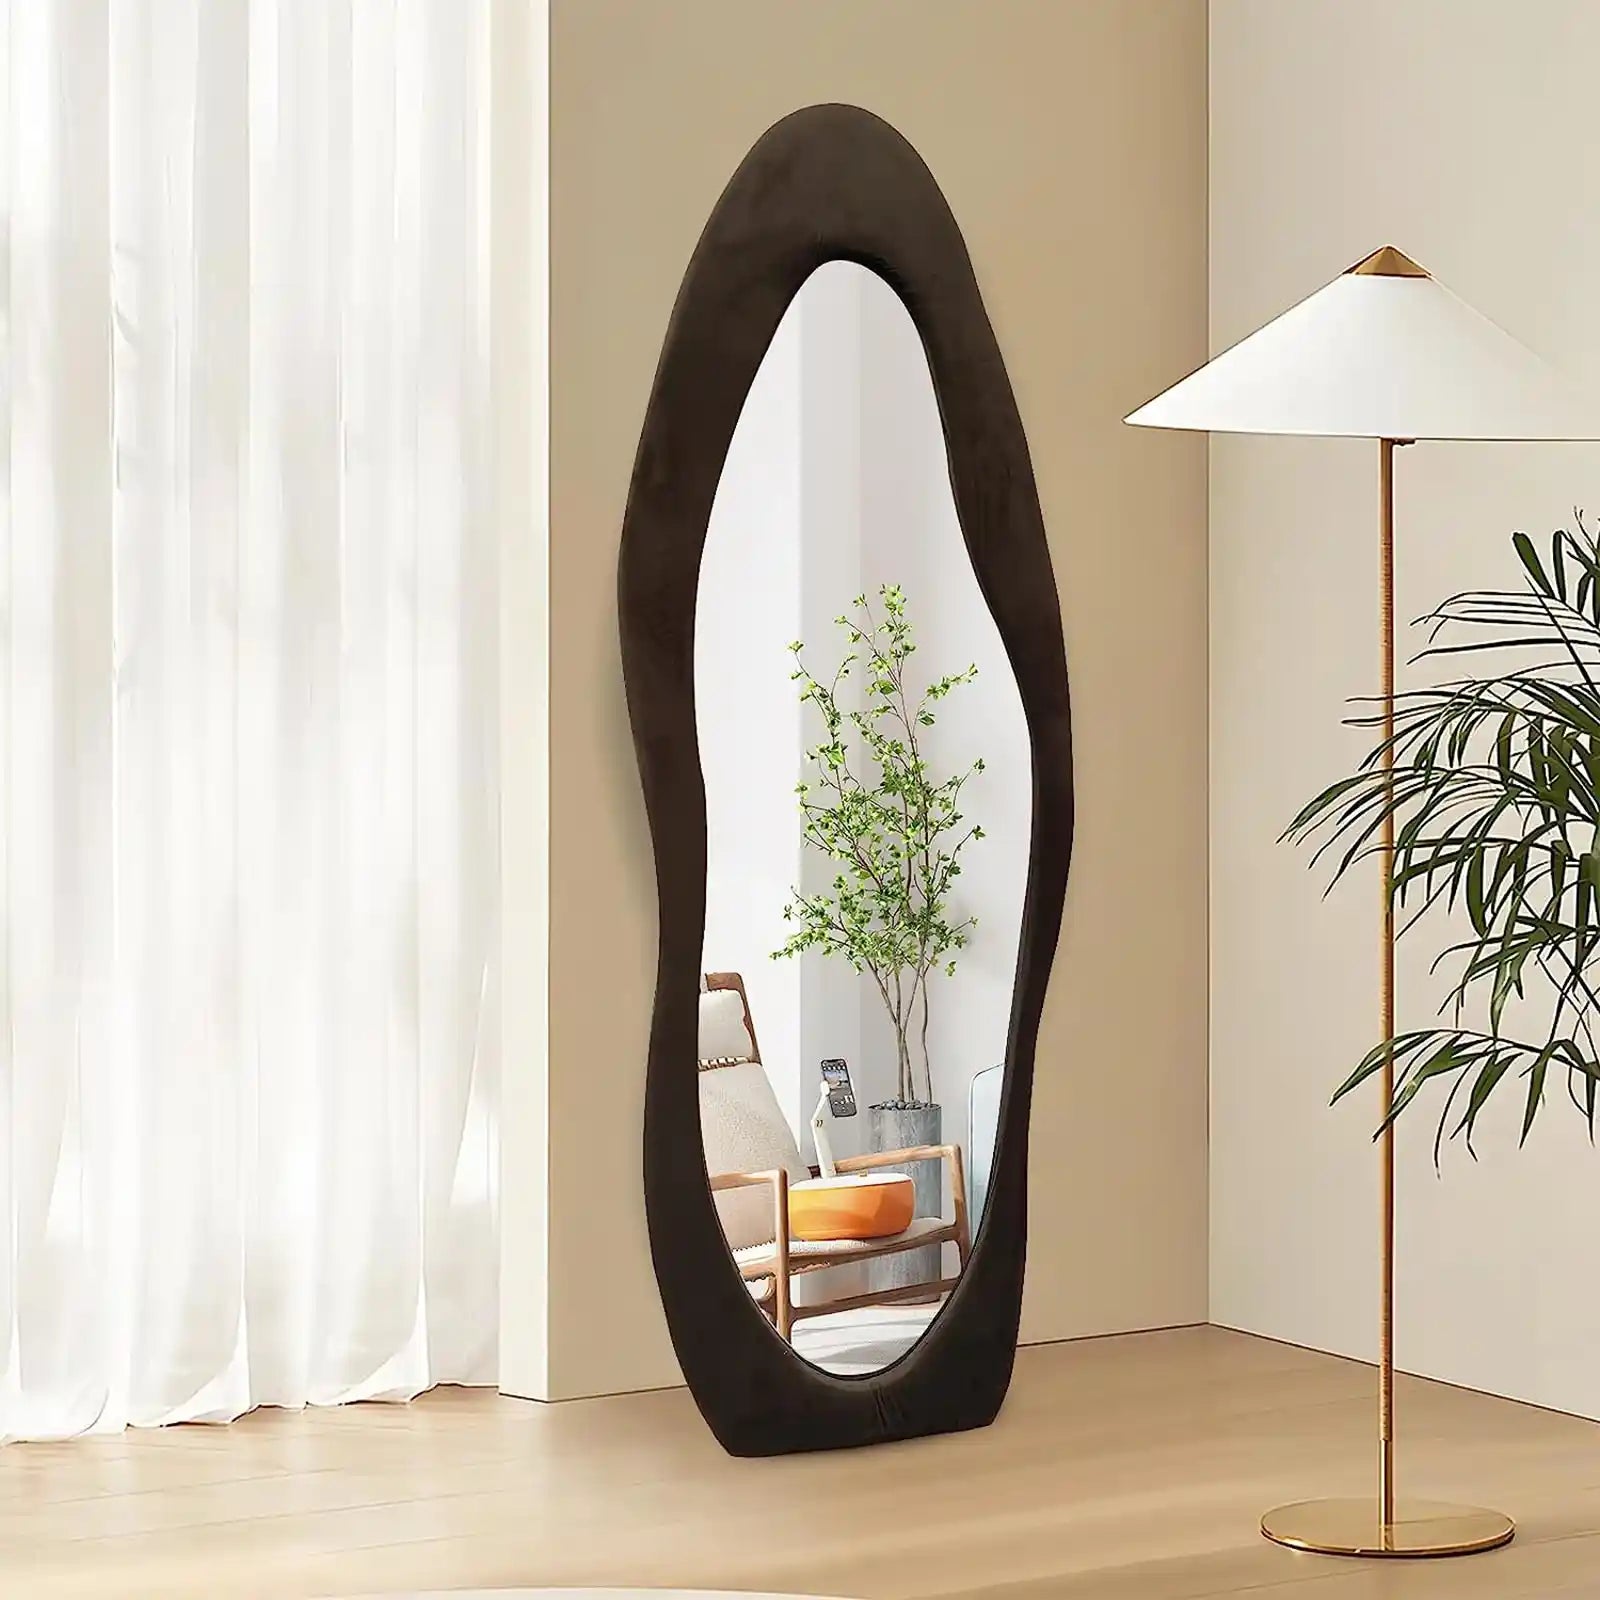 Irregular Full Length Mirror 63"x24", Flannel Wrapped Wooden Frame Full Body Mirror, Floor Mirror Full Length, Wavy Mirror Hanging or Leaning Against Wall for Cloakroom/Bedroom/Living Room